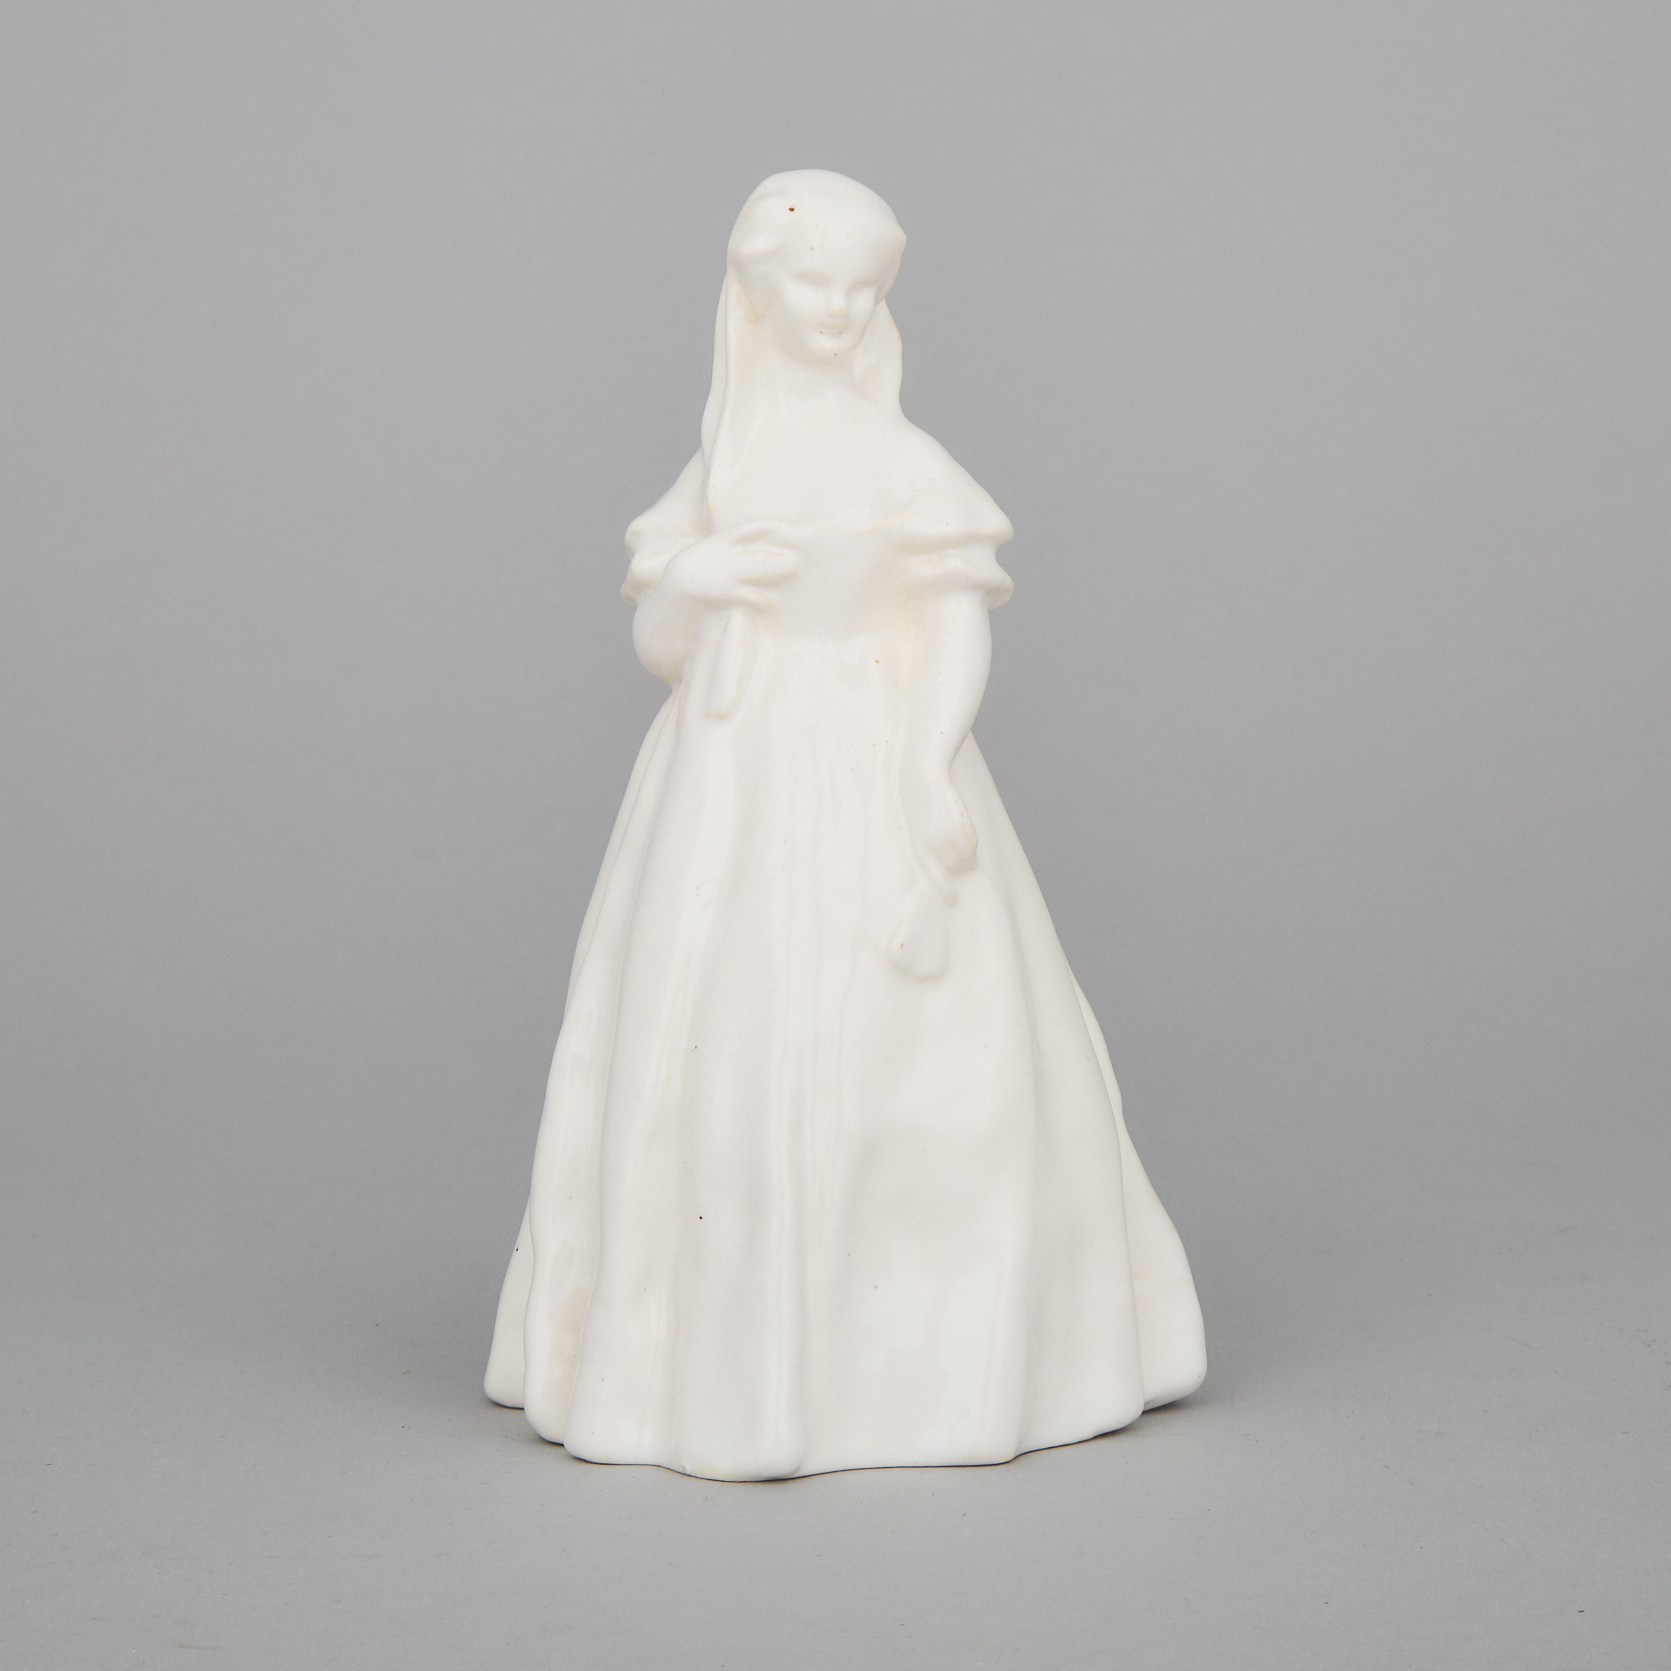 Ashtead Potters White Glazed Figure of a Young Woman with Fan, Phoebe Stabler, c.1925-30